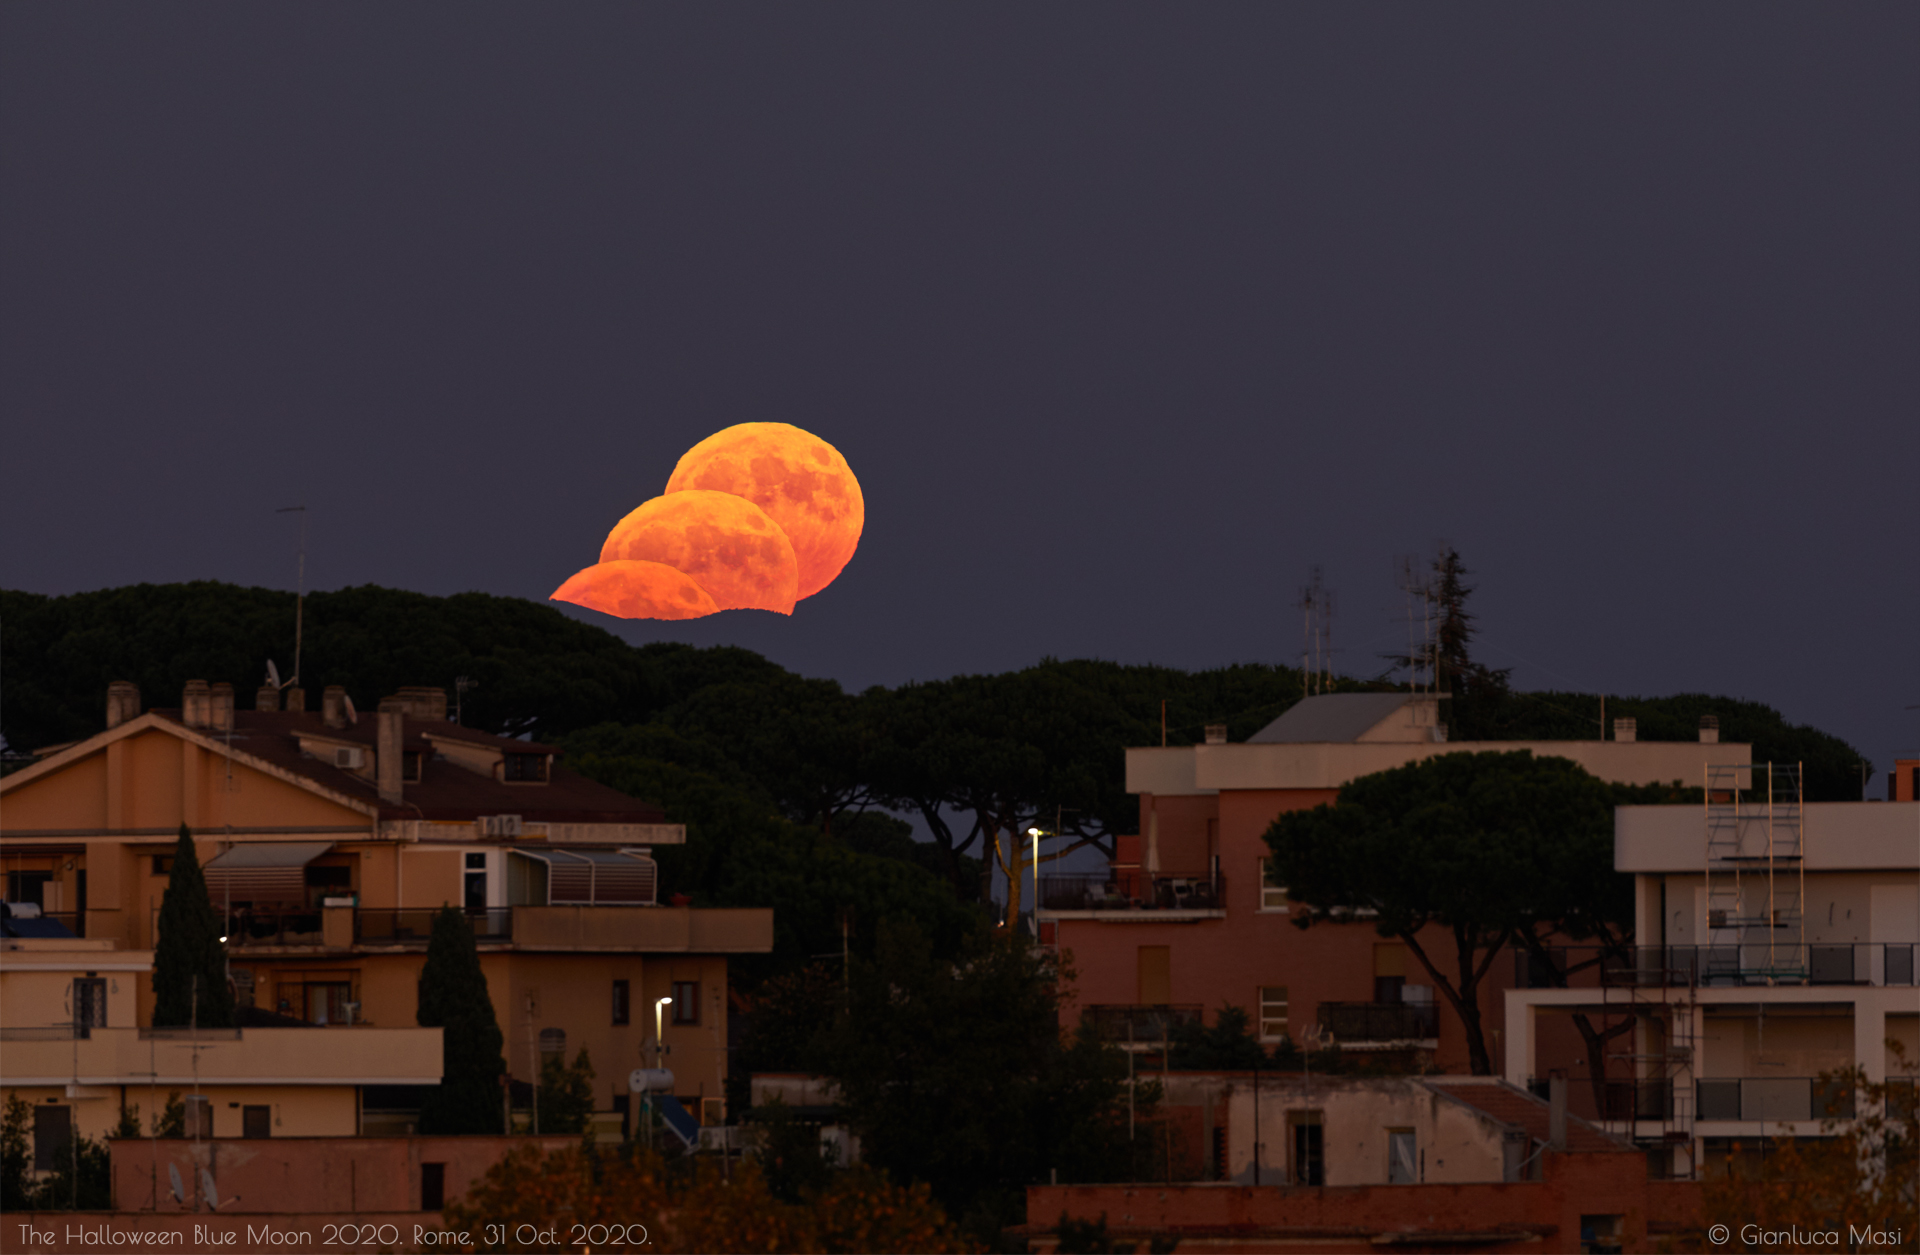 The lunar "Trick or Treat". Rome, 31 Oct. 2020.